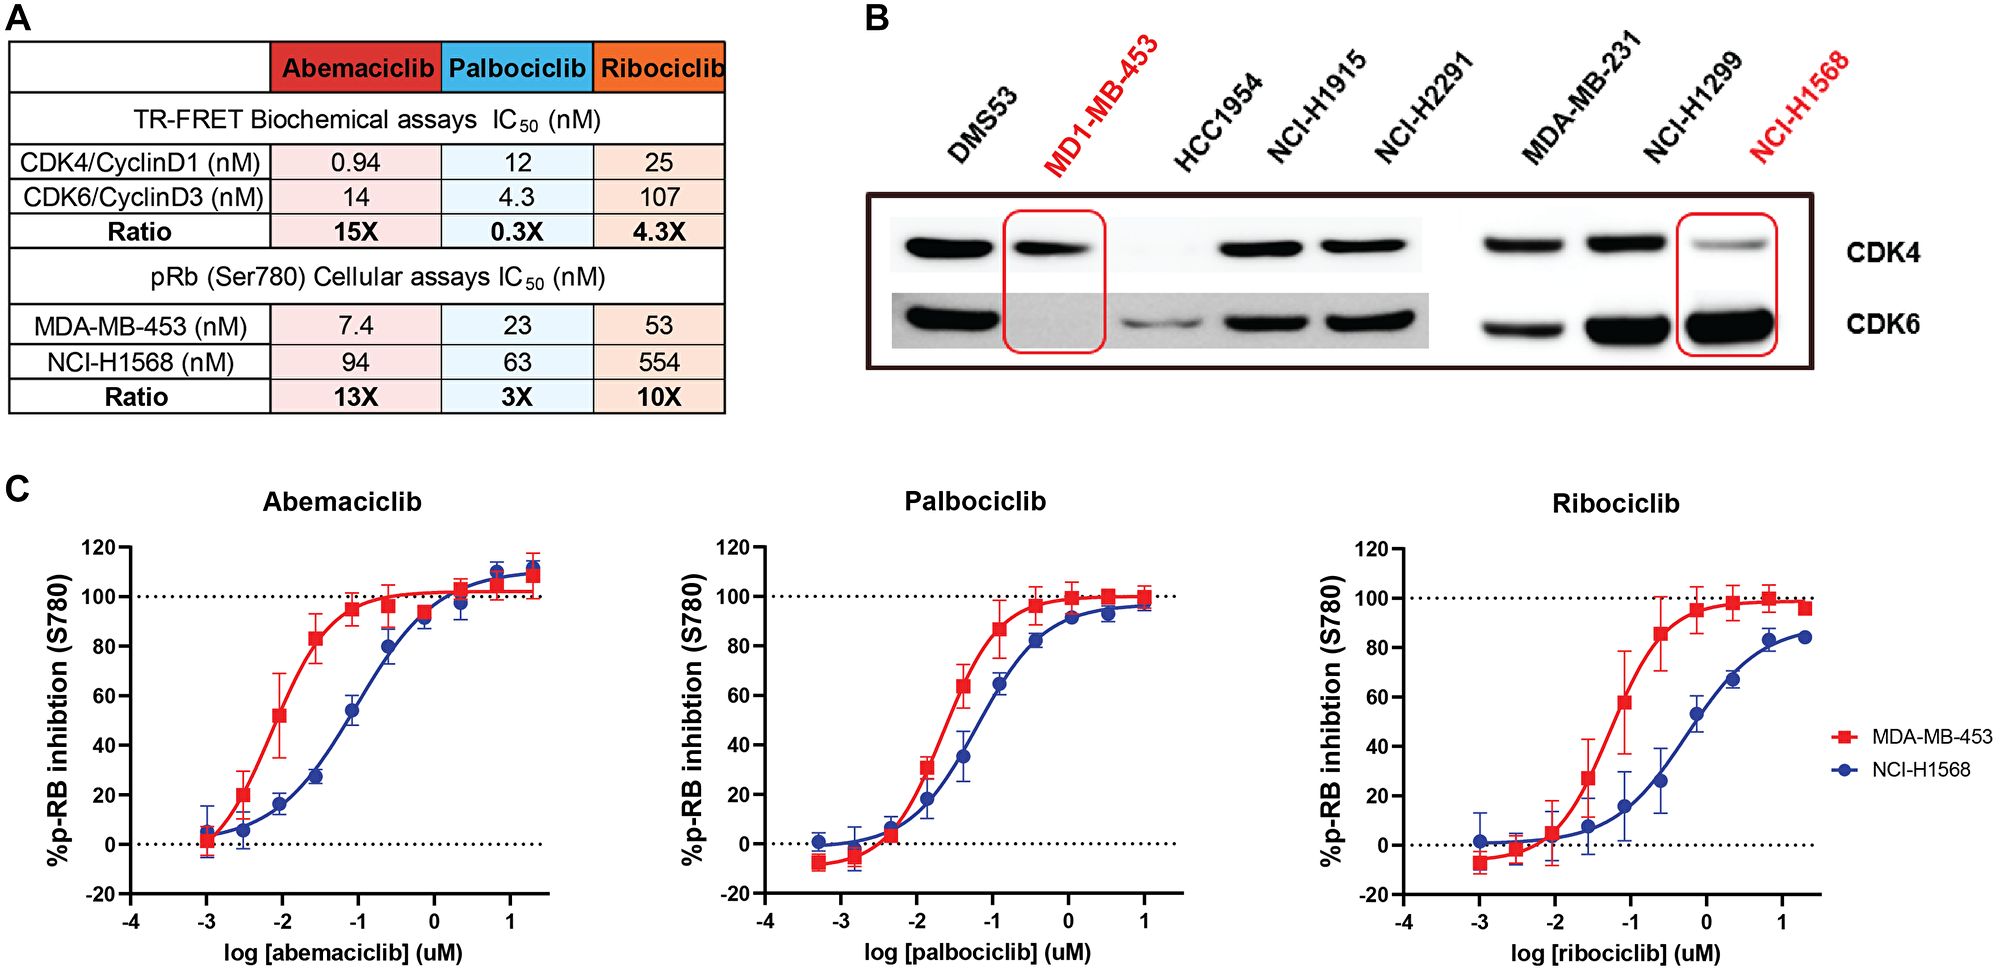 Abemaciclib is a more potent inhibitor of CDK4 than CDK6 in both biochemical and in vitro cell-based assays.